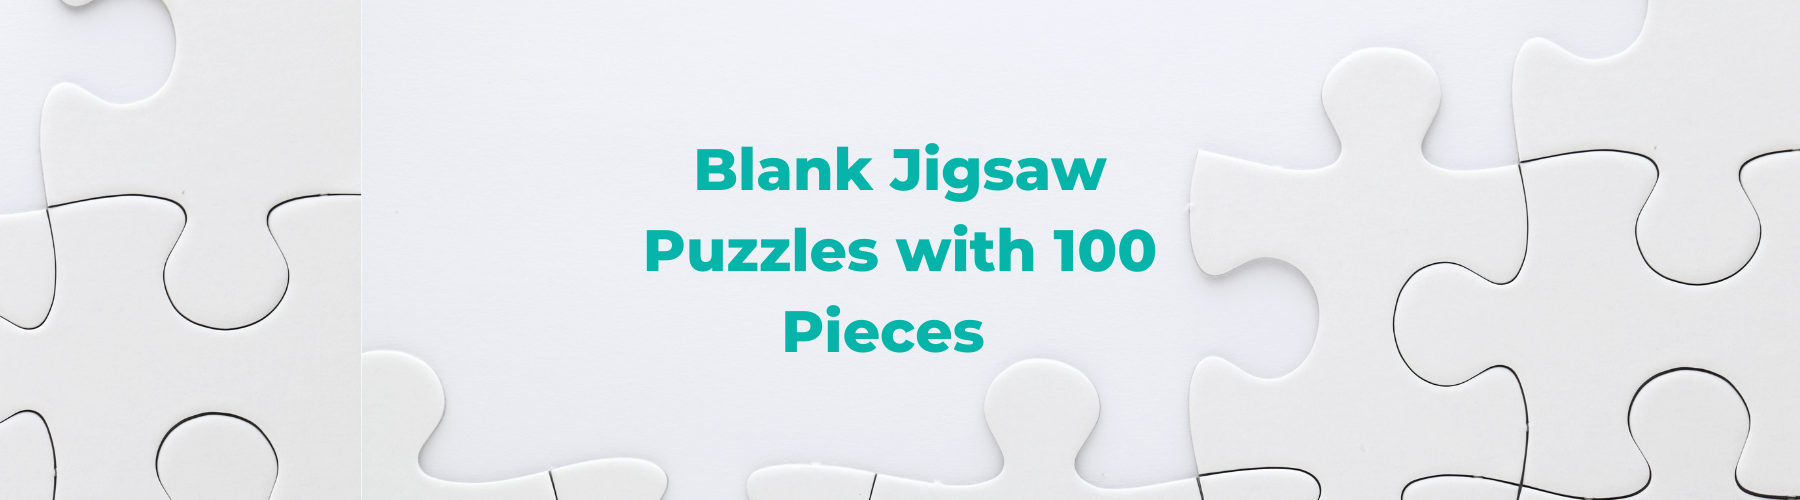 Blank Jigsaw Puzzles With 100 Pieces